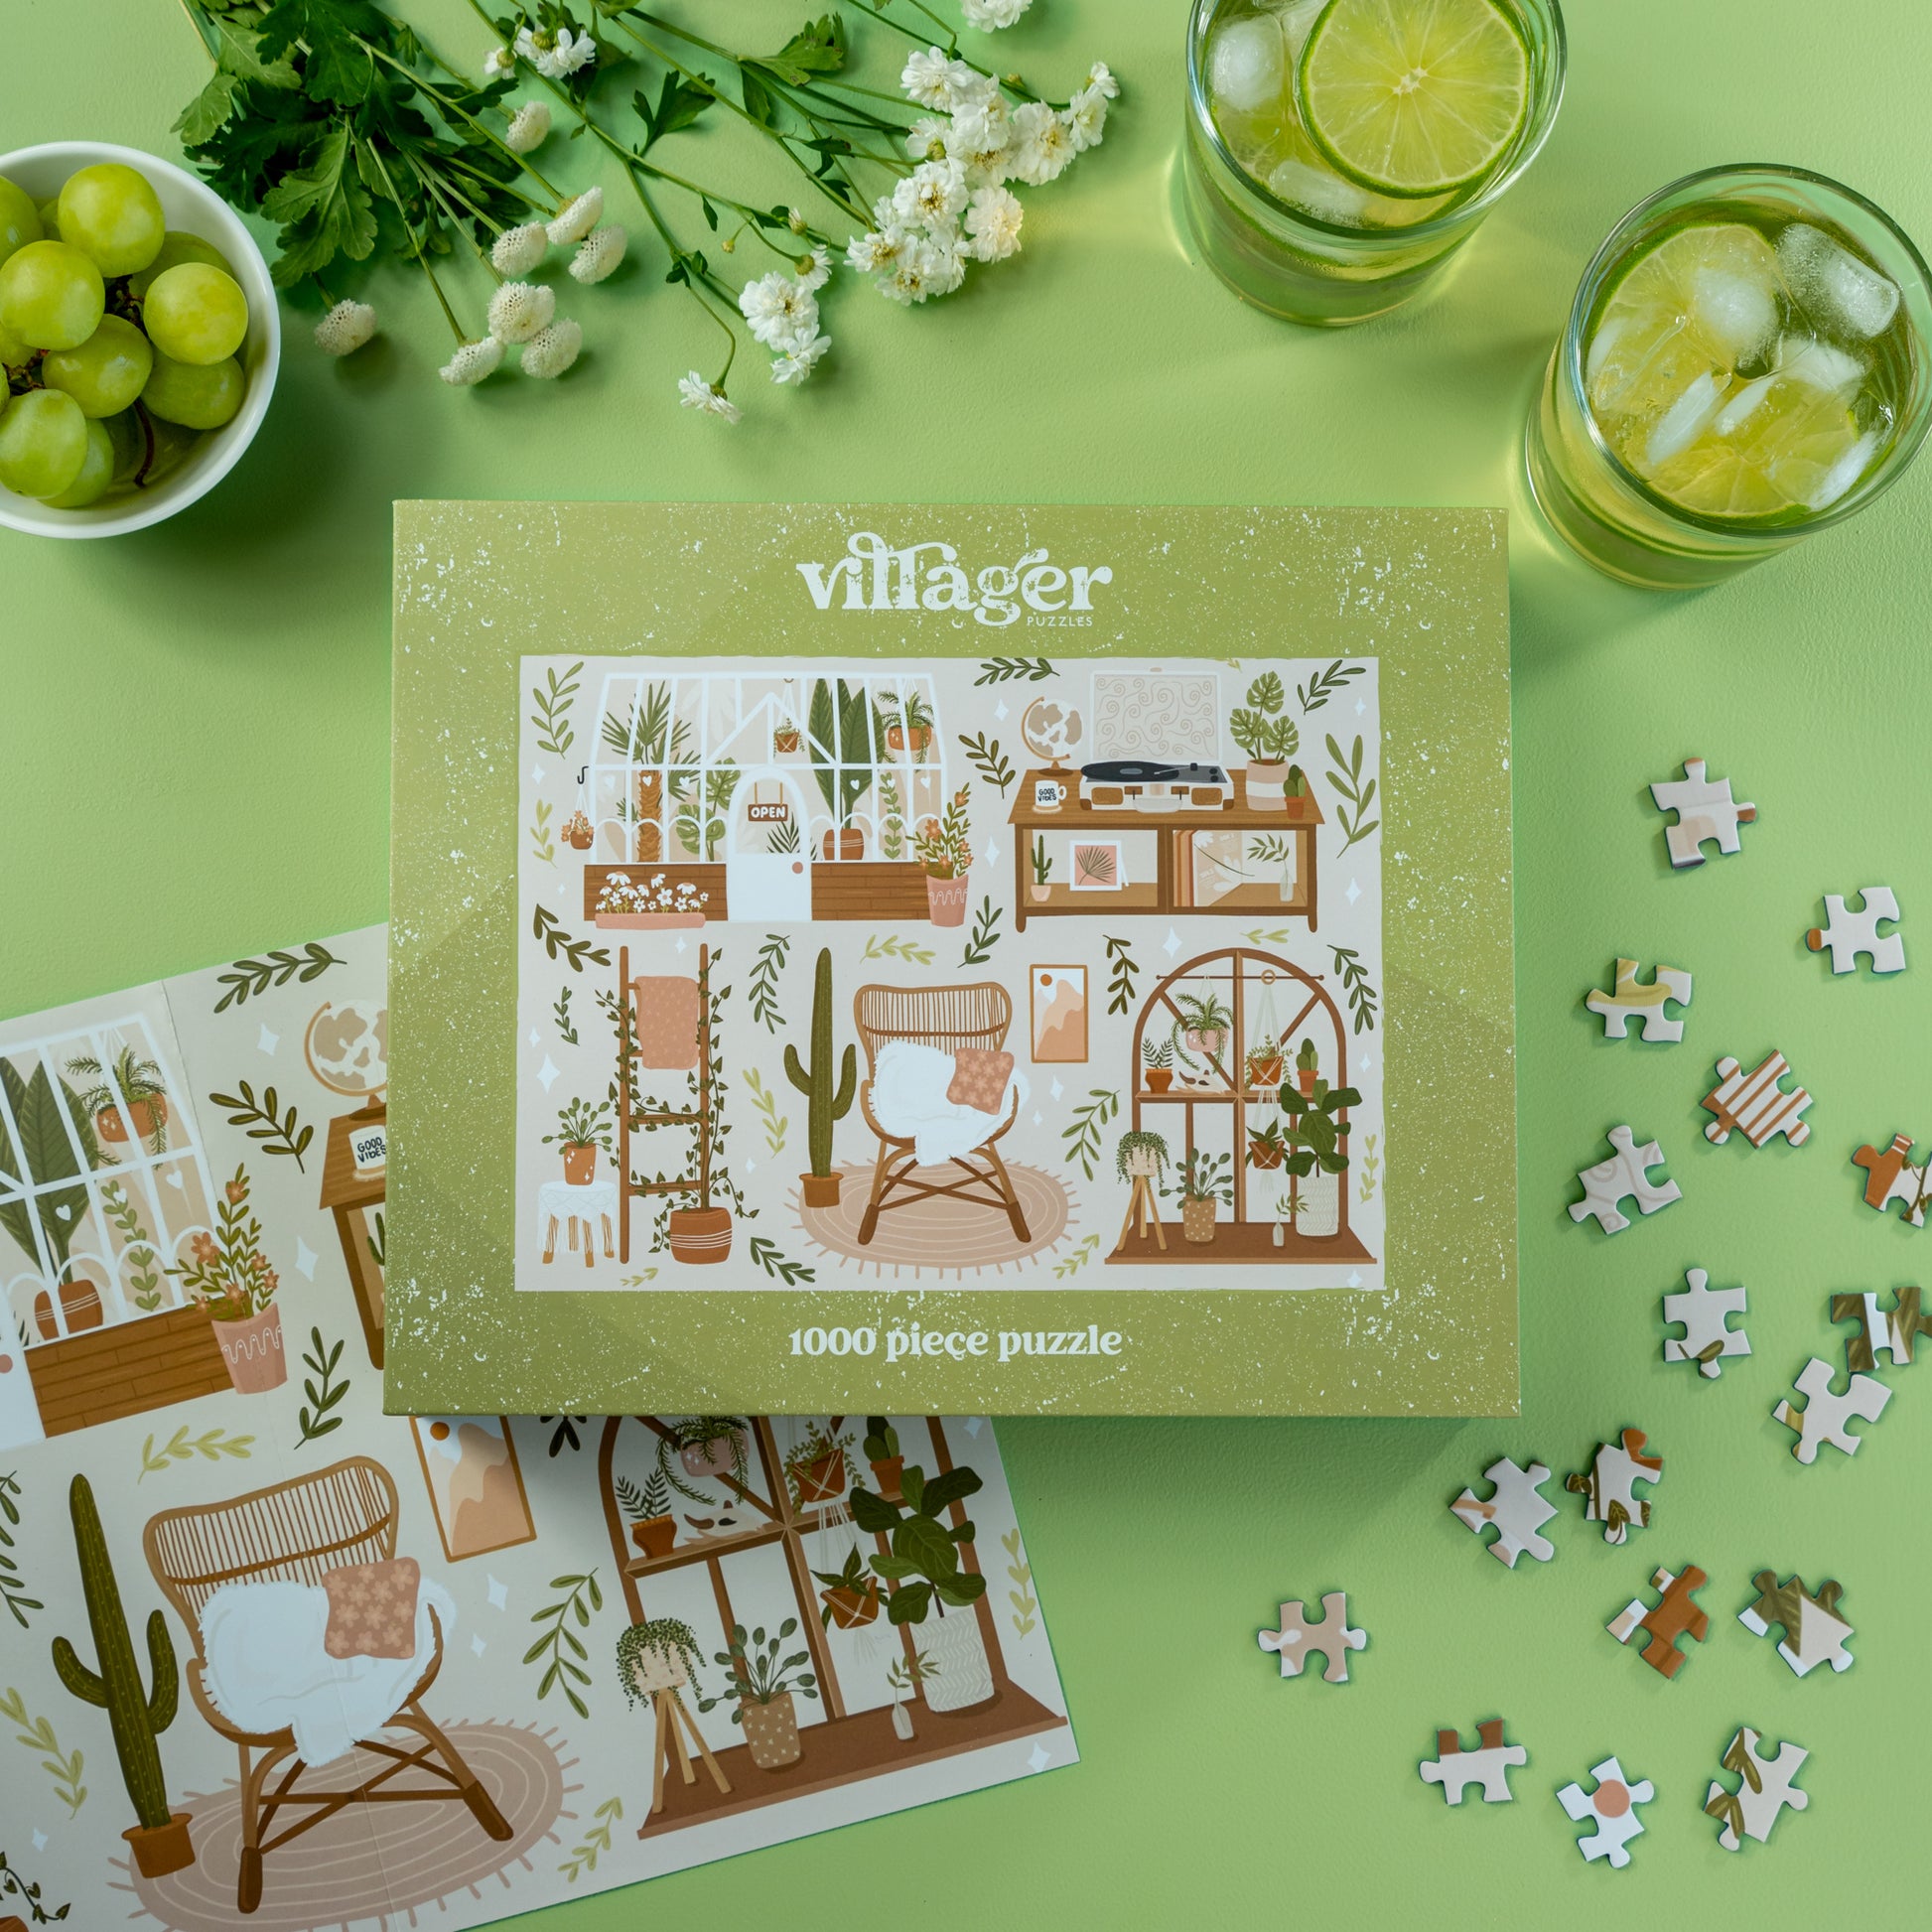 Lifestyle image of Villager Puzzle | Boho Living designed by Jess Capeling of Calgary AB Canada